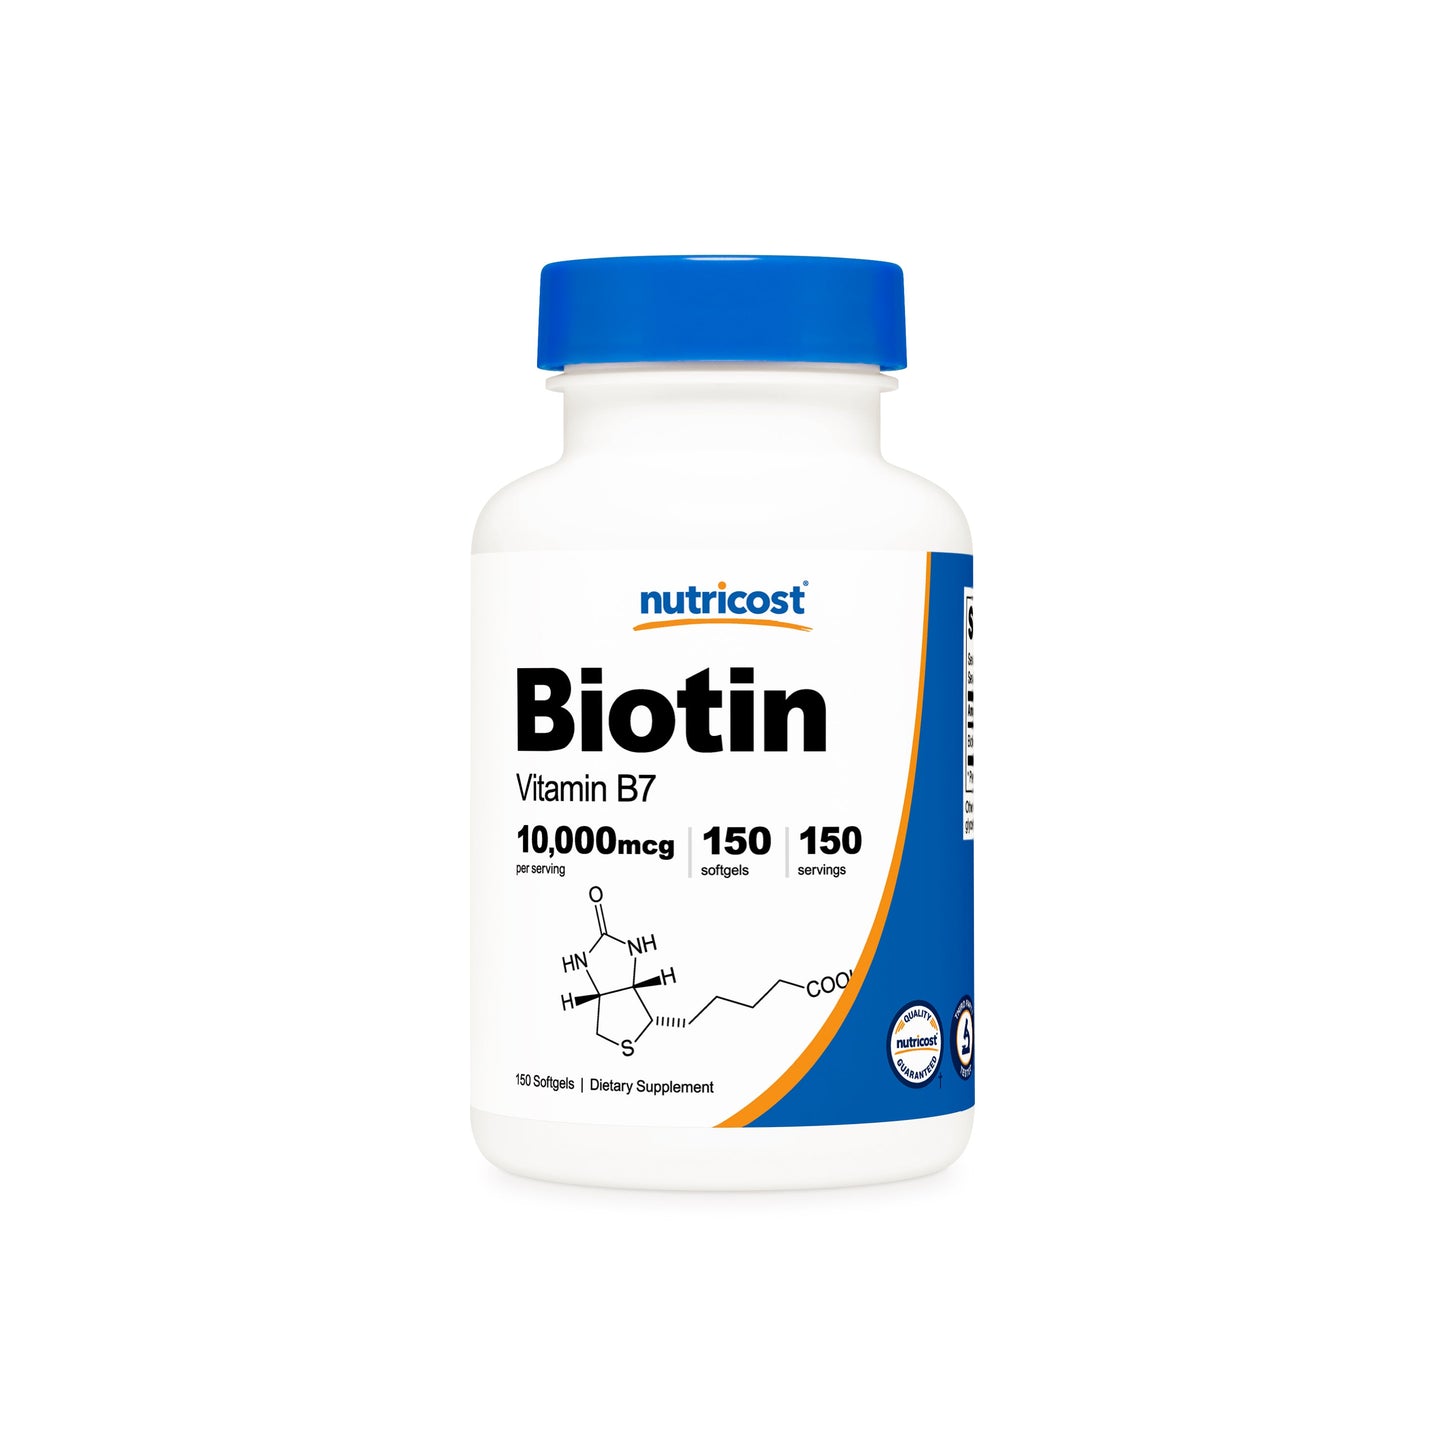 Nutricost Biotin with Virgin Organic Coconut Oil Softgels